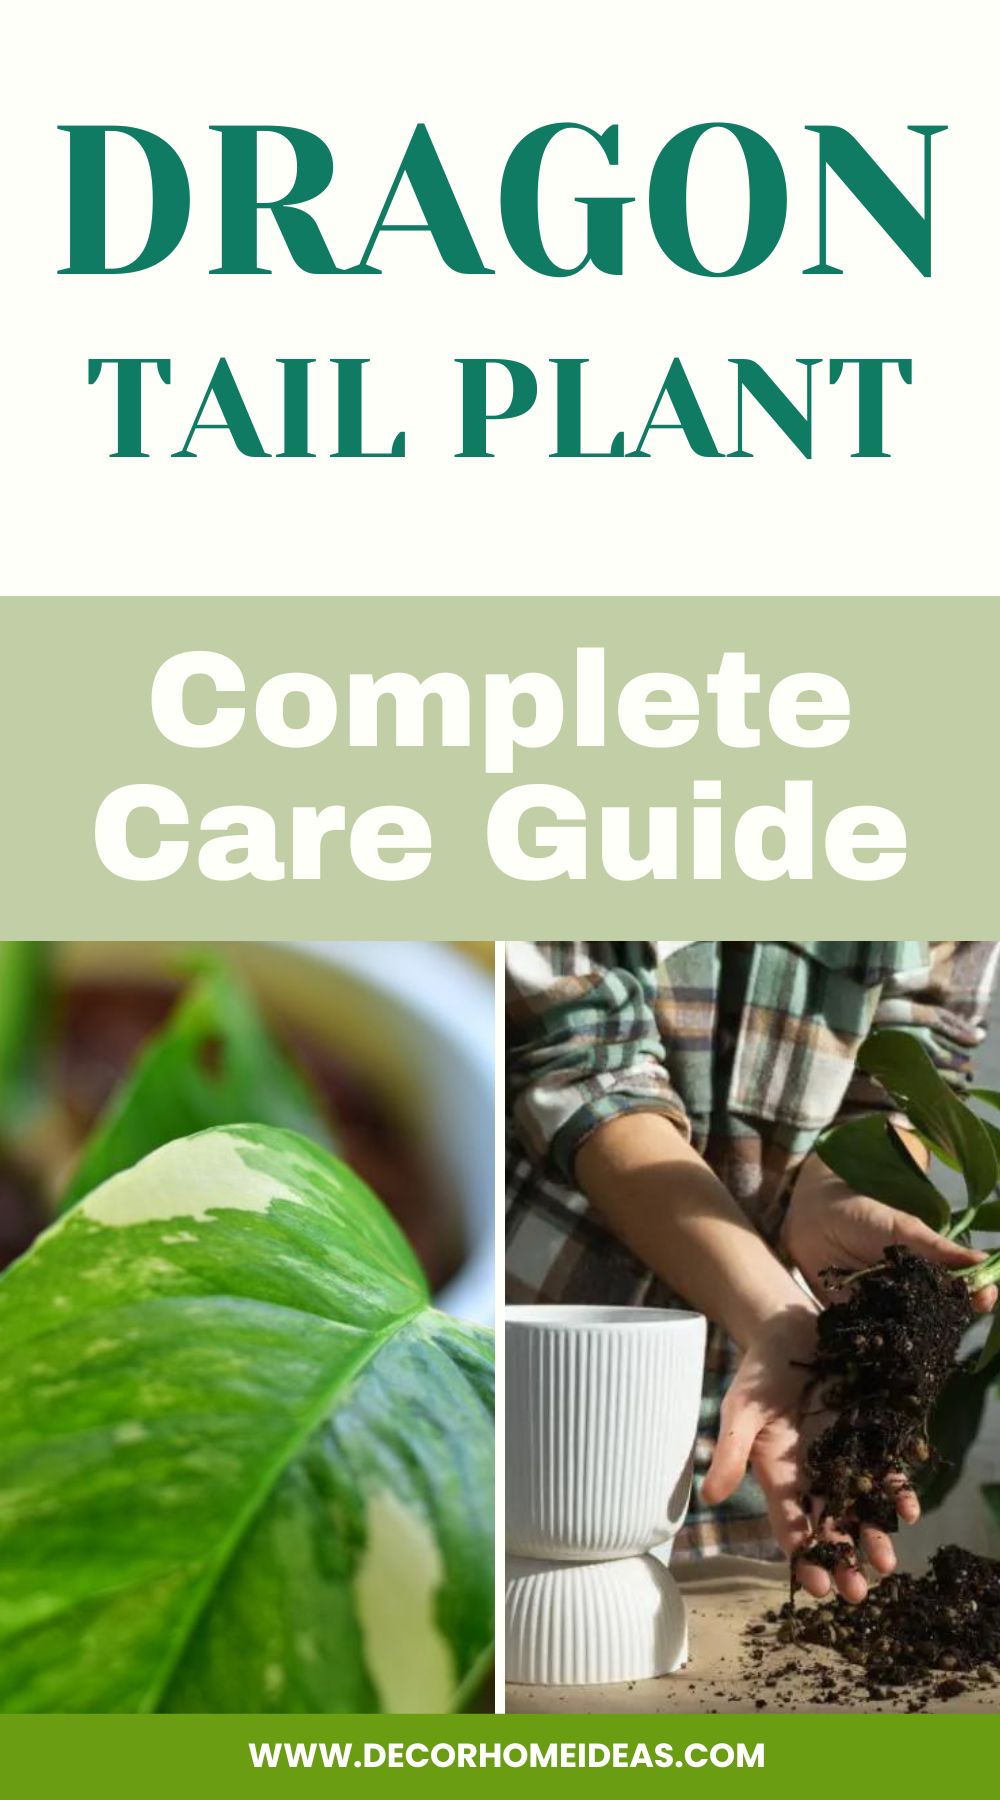 Unleash the beauty of the exotic Dragon Tail plant with this complete care guide. Explore its unique characteristics and master essential tips to ensure optimal growth and vibrancy for this stunning foliage in your indoor space or garden.